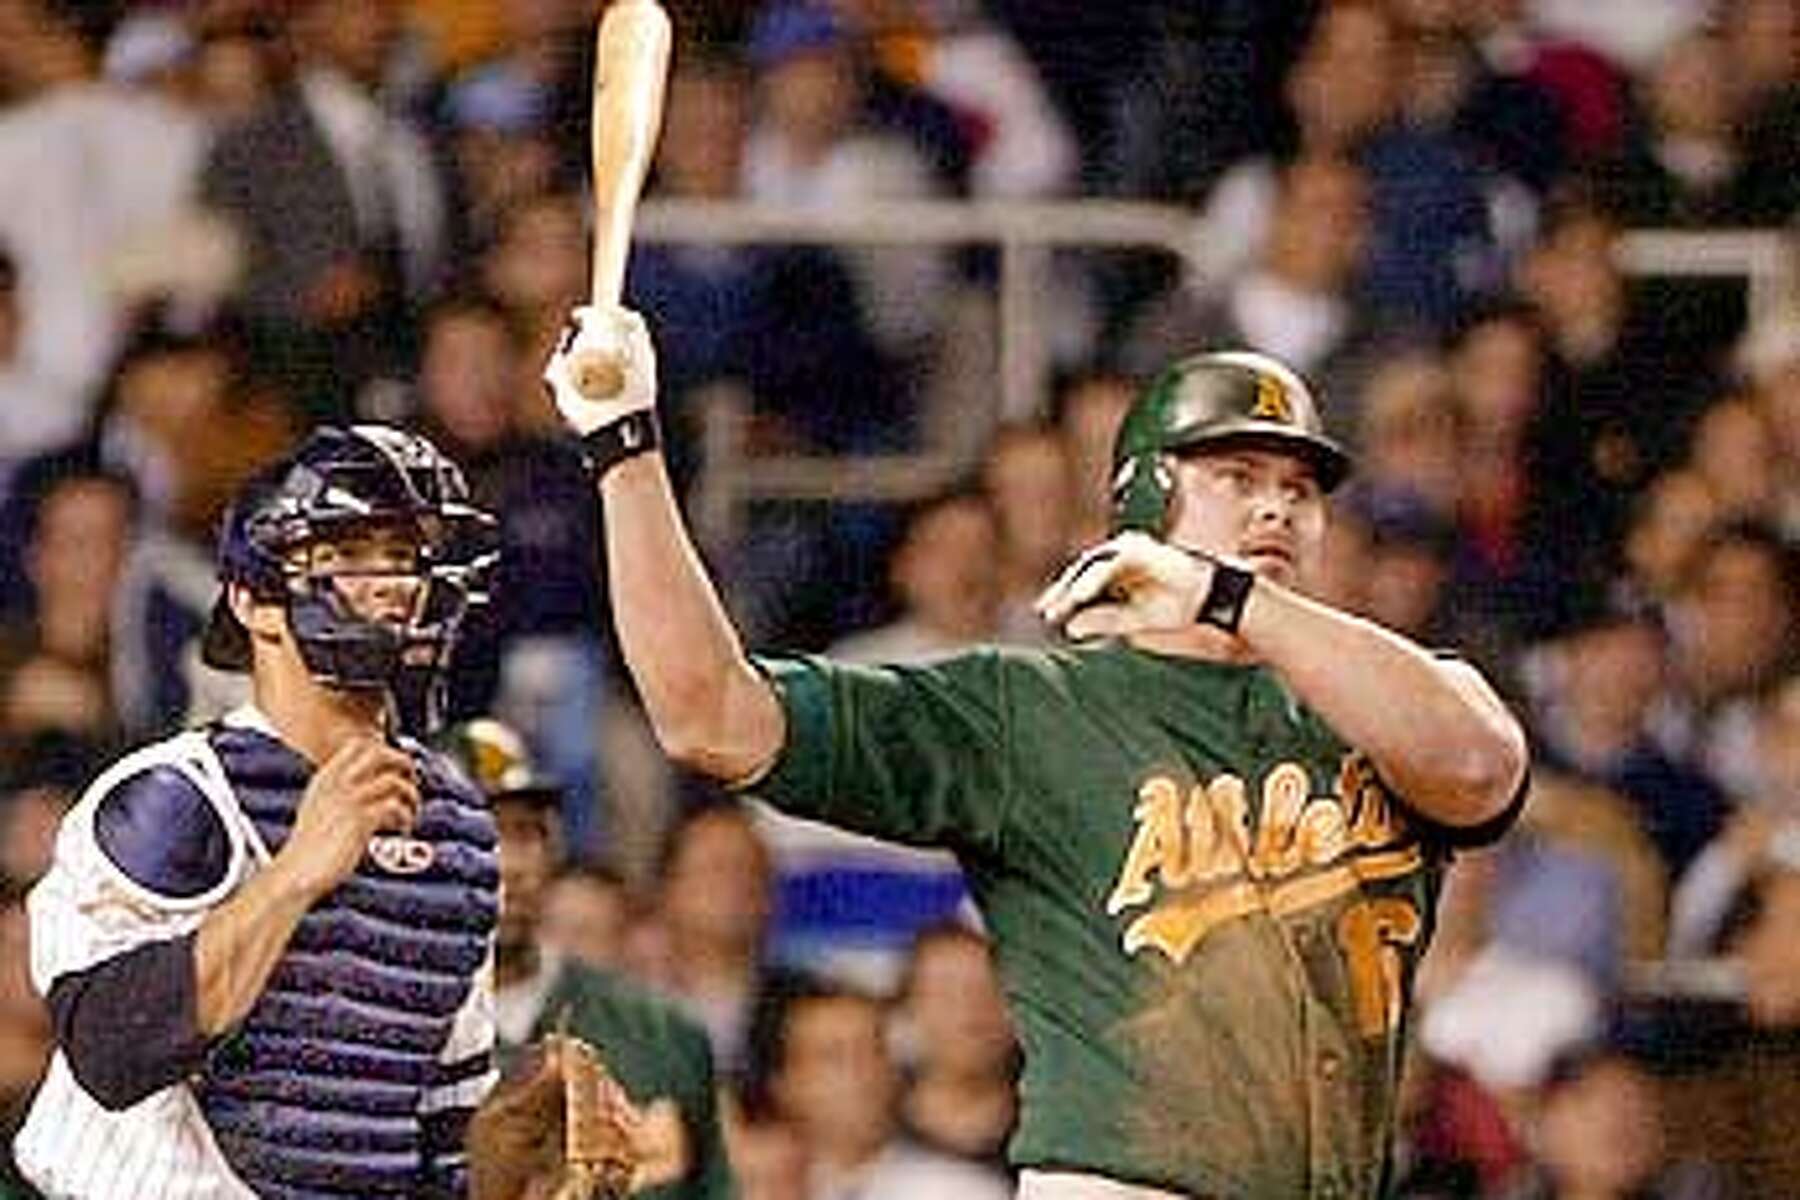 Do-over: The A's sign Jason Giambi to an extension in 2001 - The Athletic